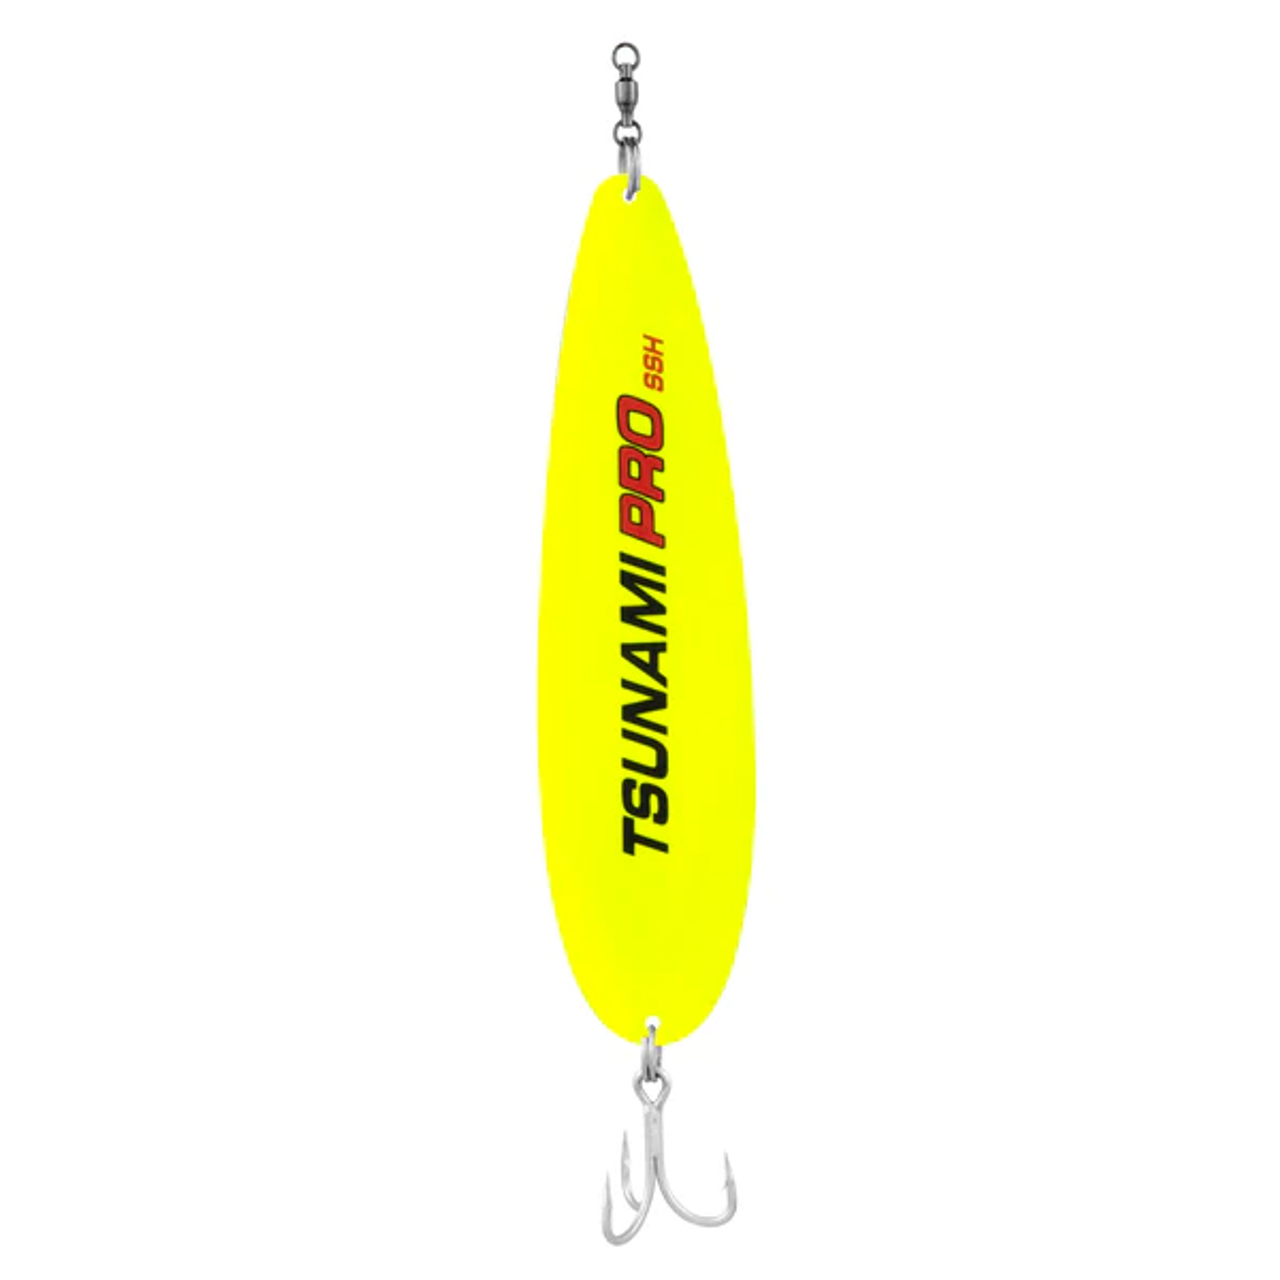 11 Pro Flutter Spoon - 6oz - Chartreuse - Ramsey Outdoor